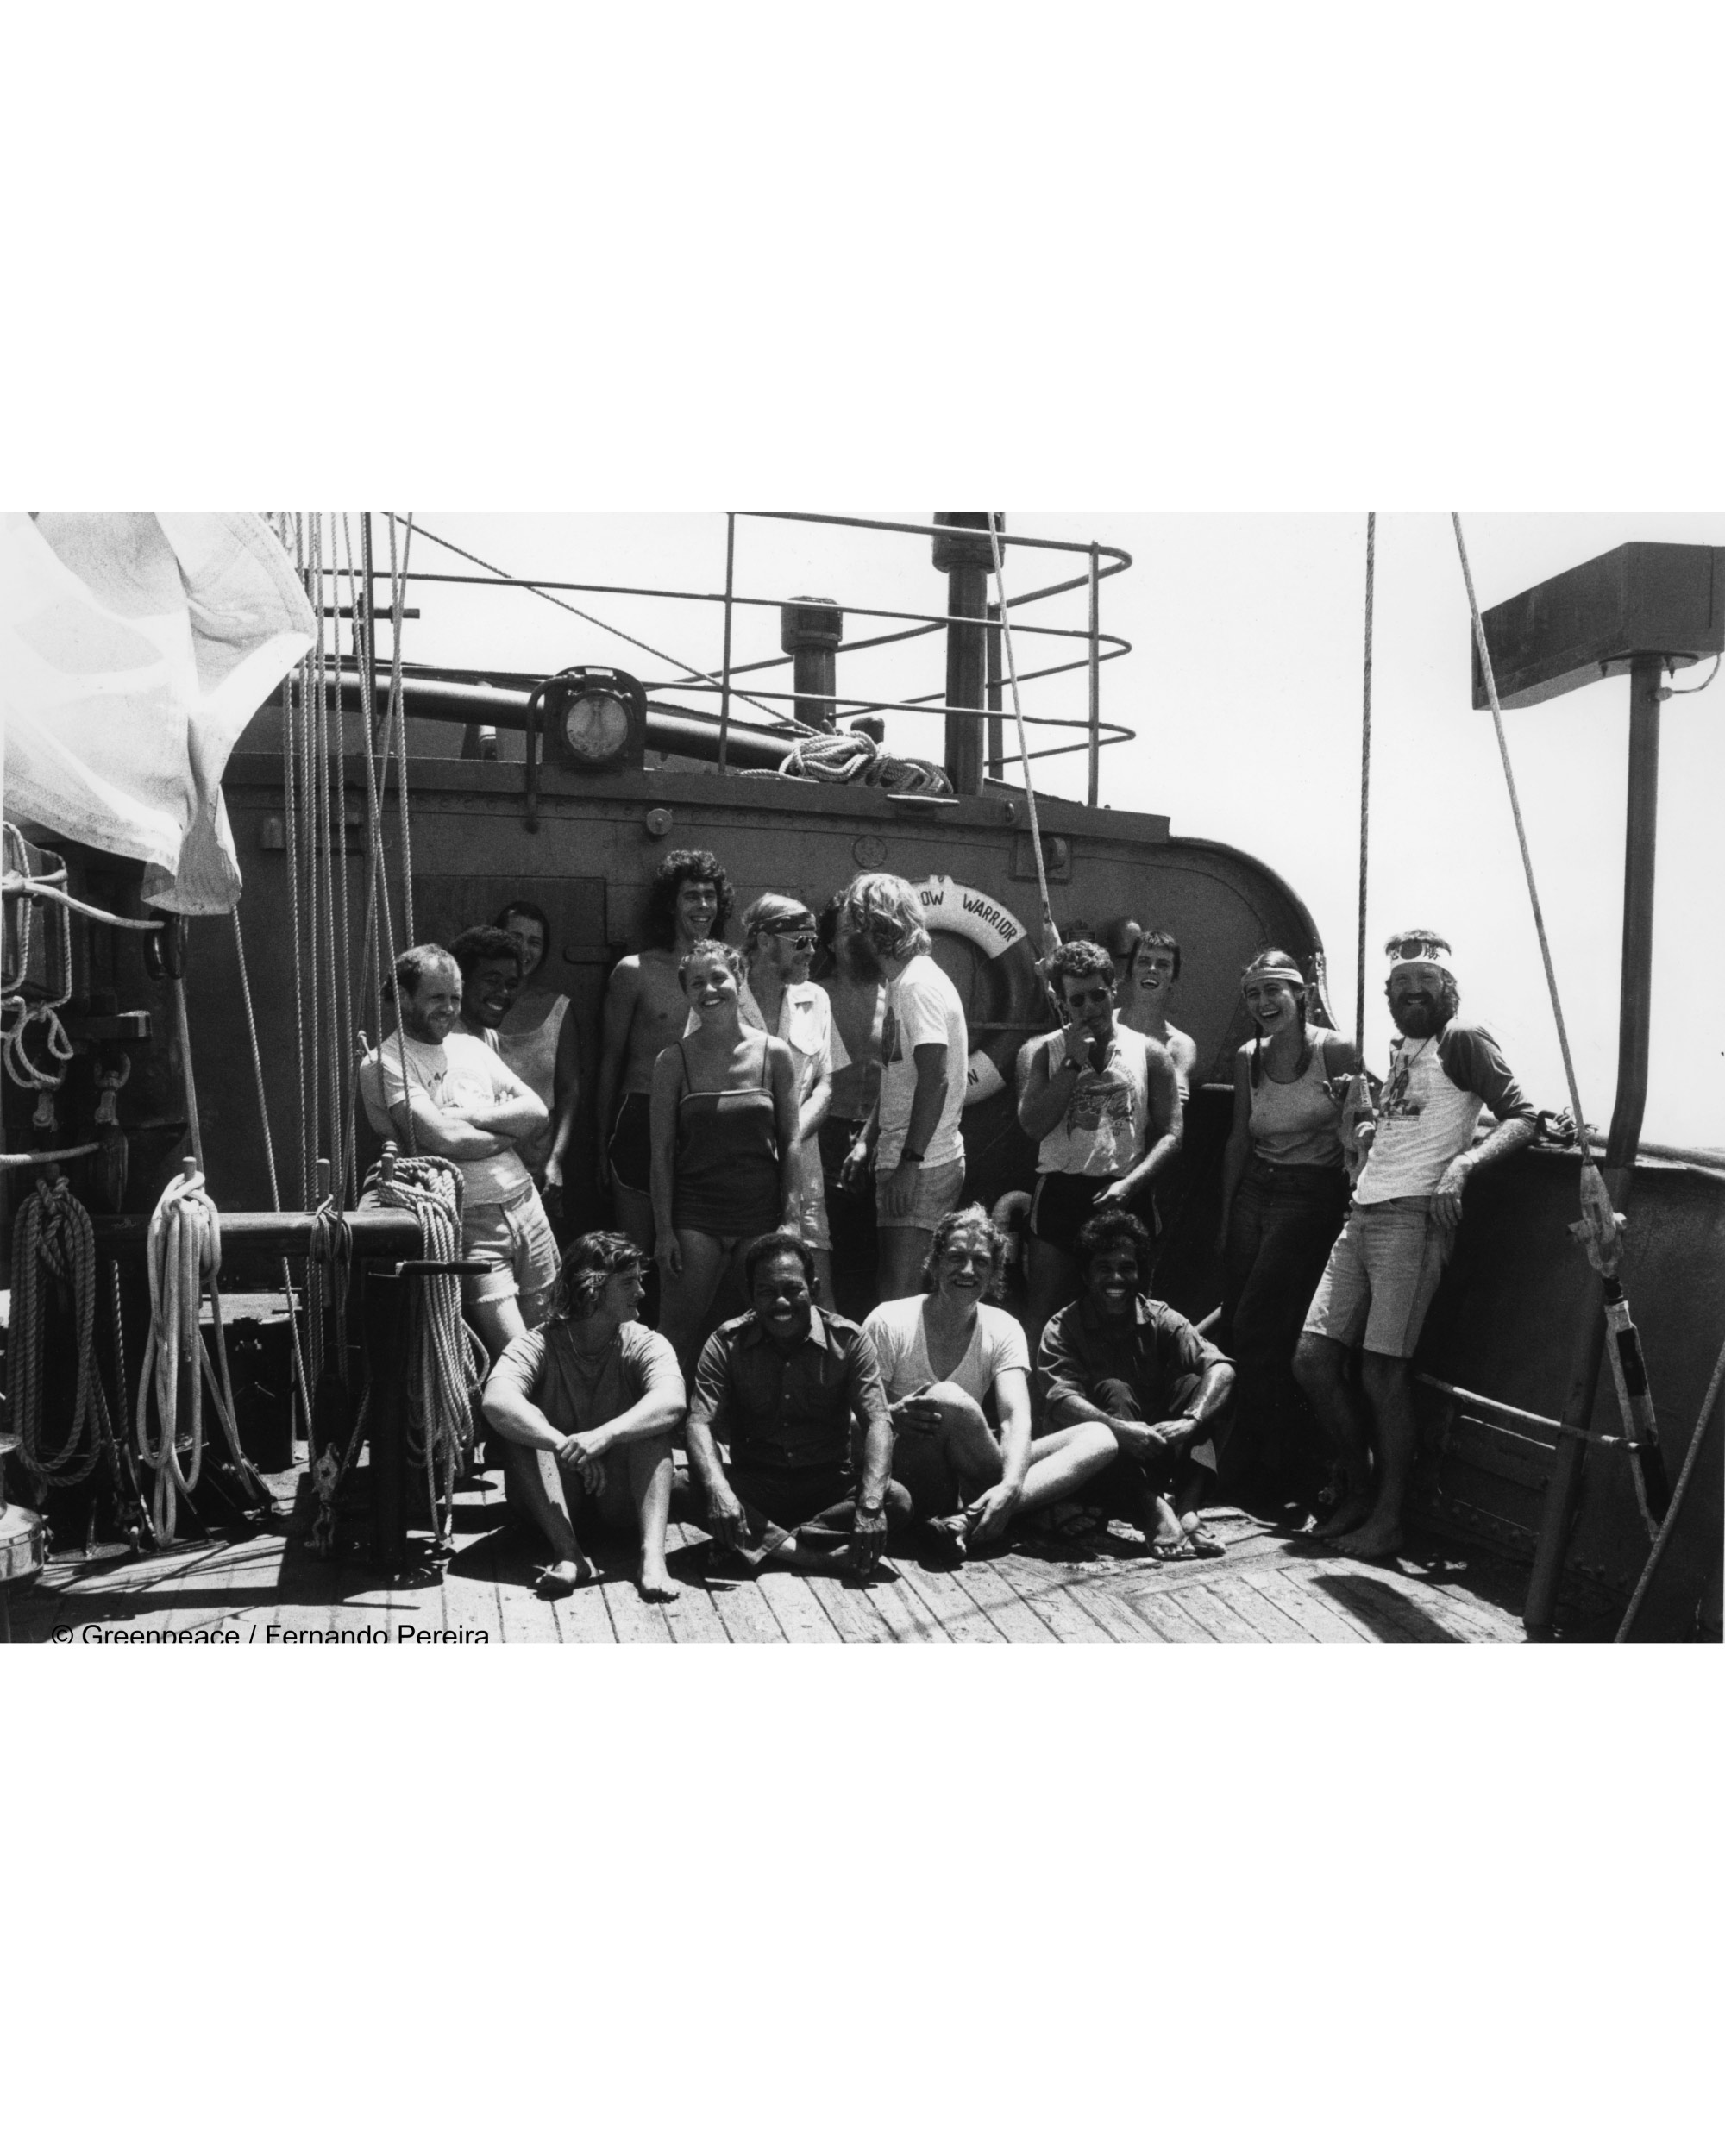 Peter (standing, 4th from right) with his Rainbow Warrior crew. Image courtesy of Greenpeace.